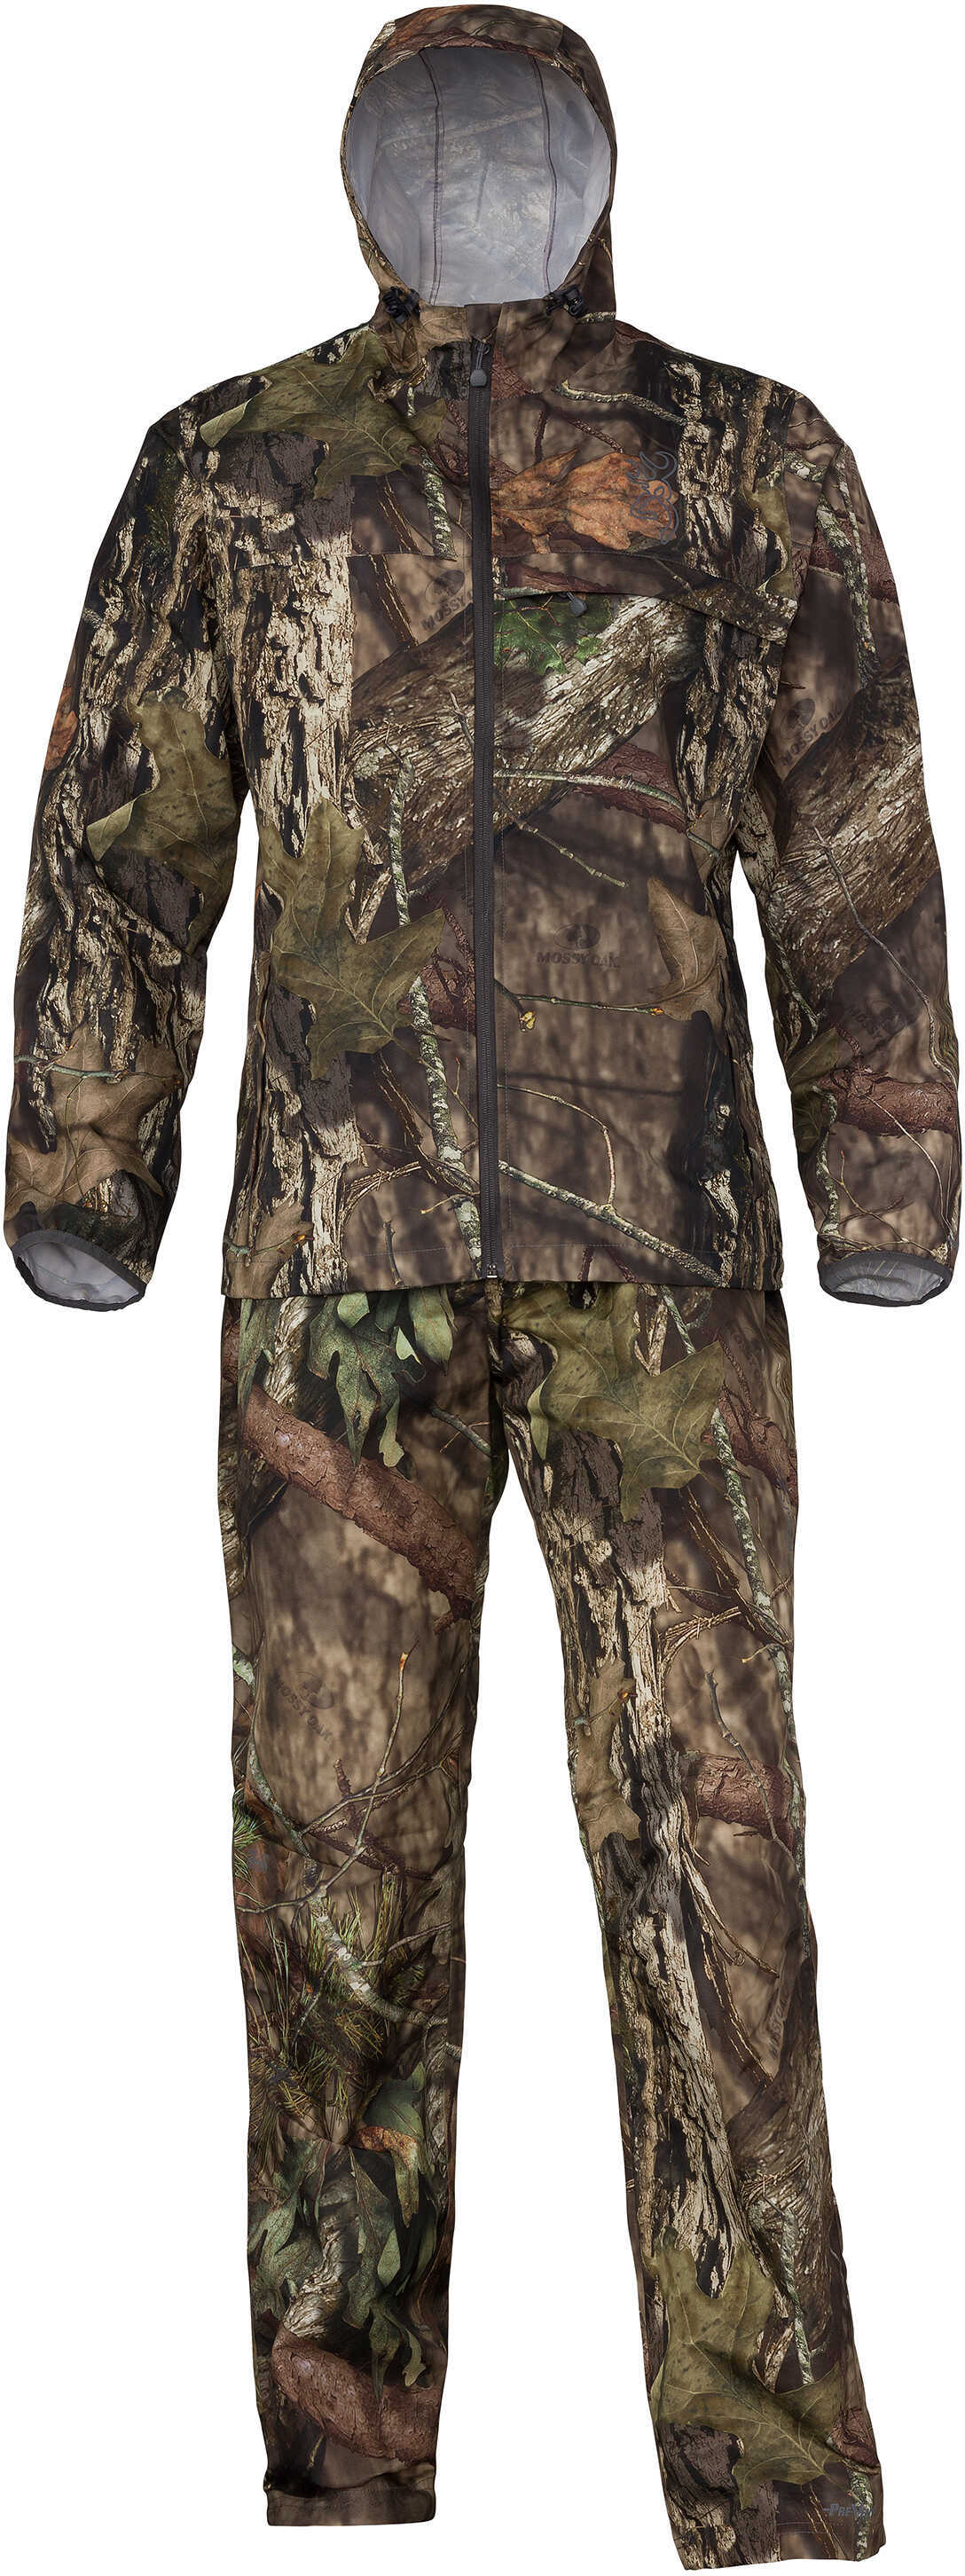 Browning Hell's Canyon CFS-WD Rain Suit Sixe 2XL (Mossy Oak Break-up Country